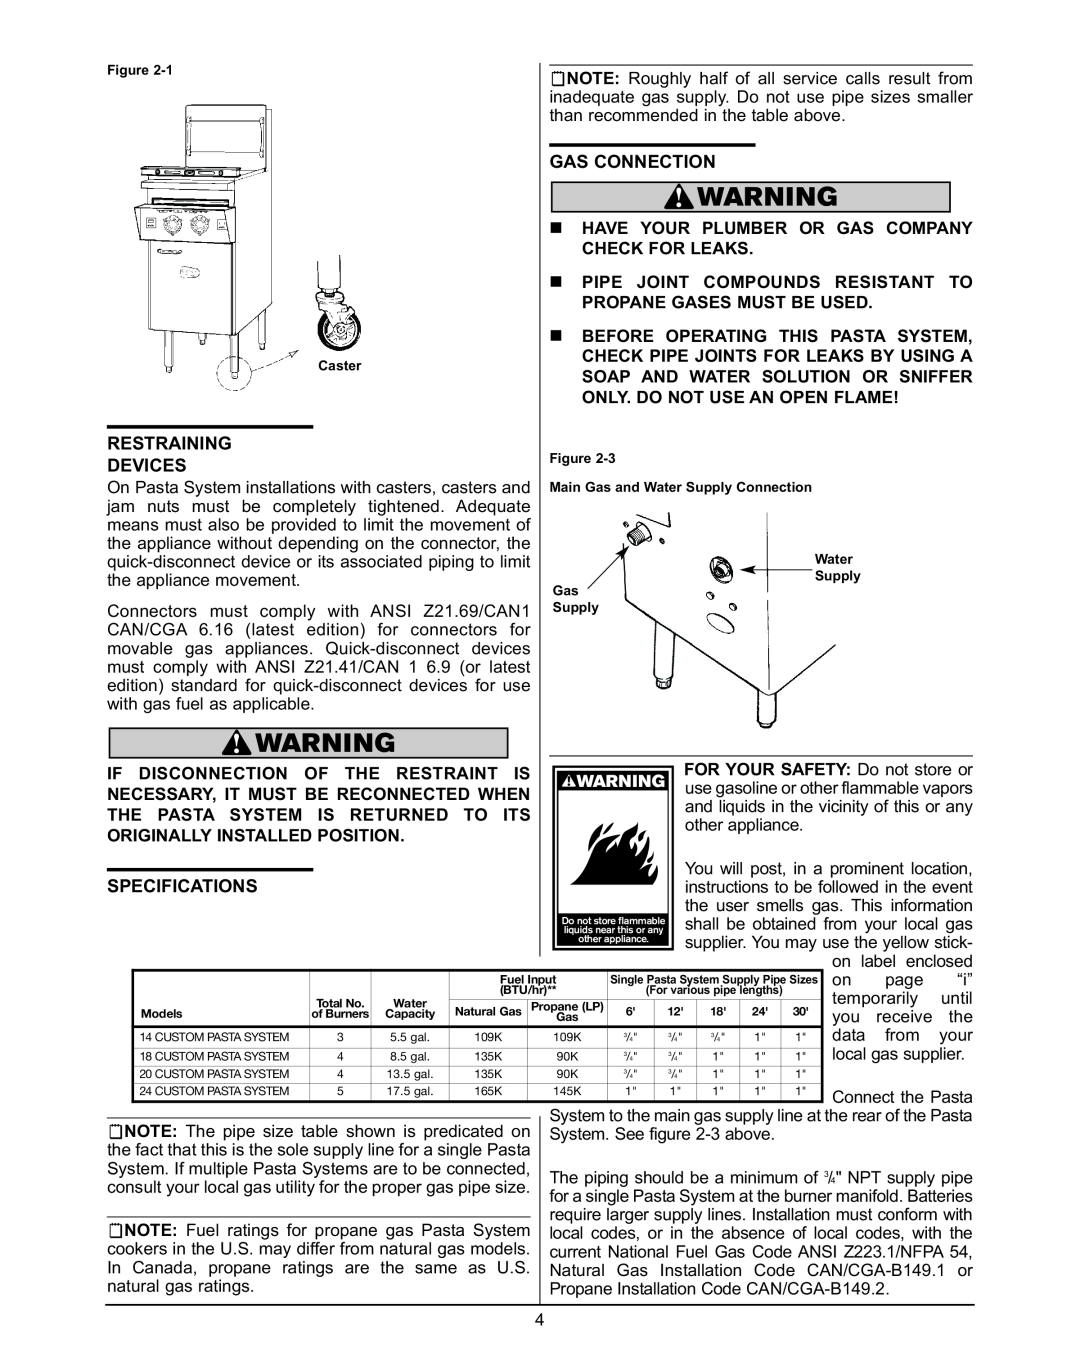 Keating Of Chicago Gas Custom Pasta System manual Restraining Devices, Gas Connection, Specifications 